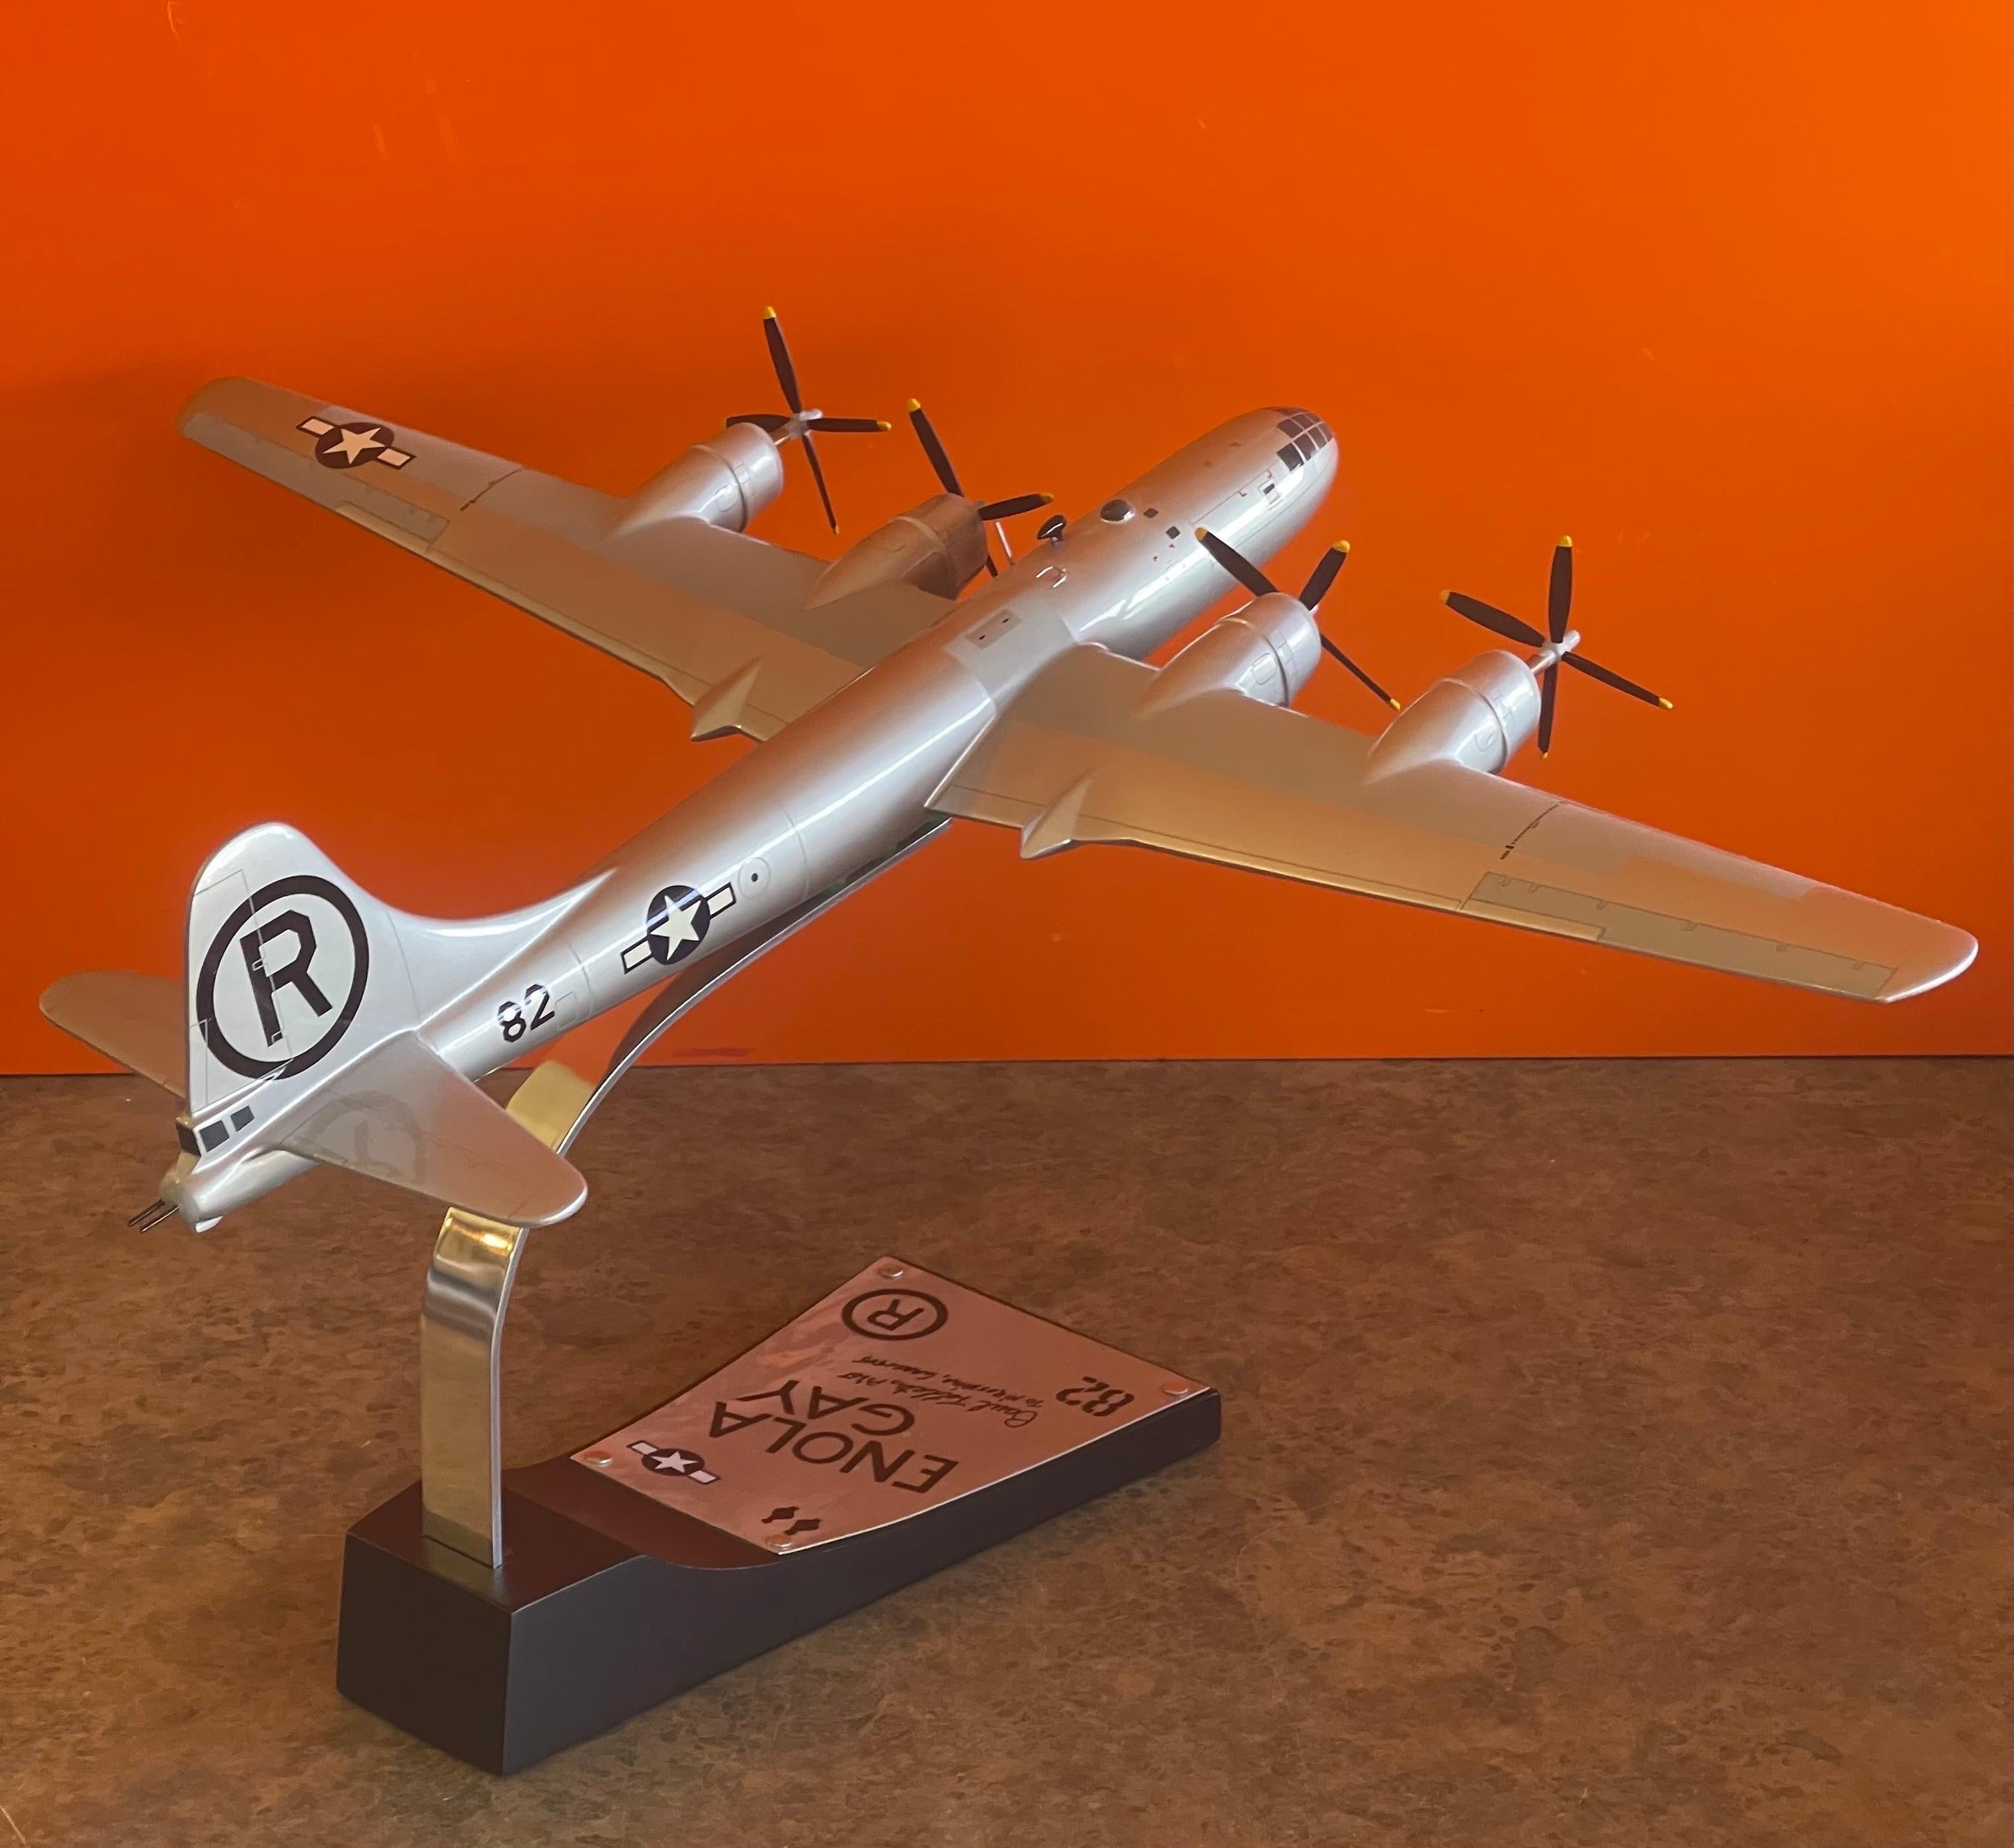 American Enola Gay B-29 Bomber Model Airplane, Signed by Pilot Paul Tibbetts WW II For Sale